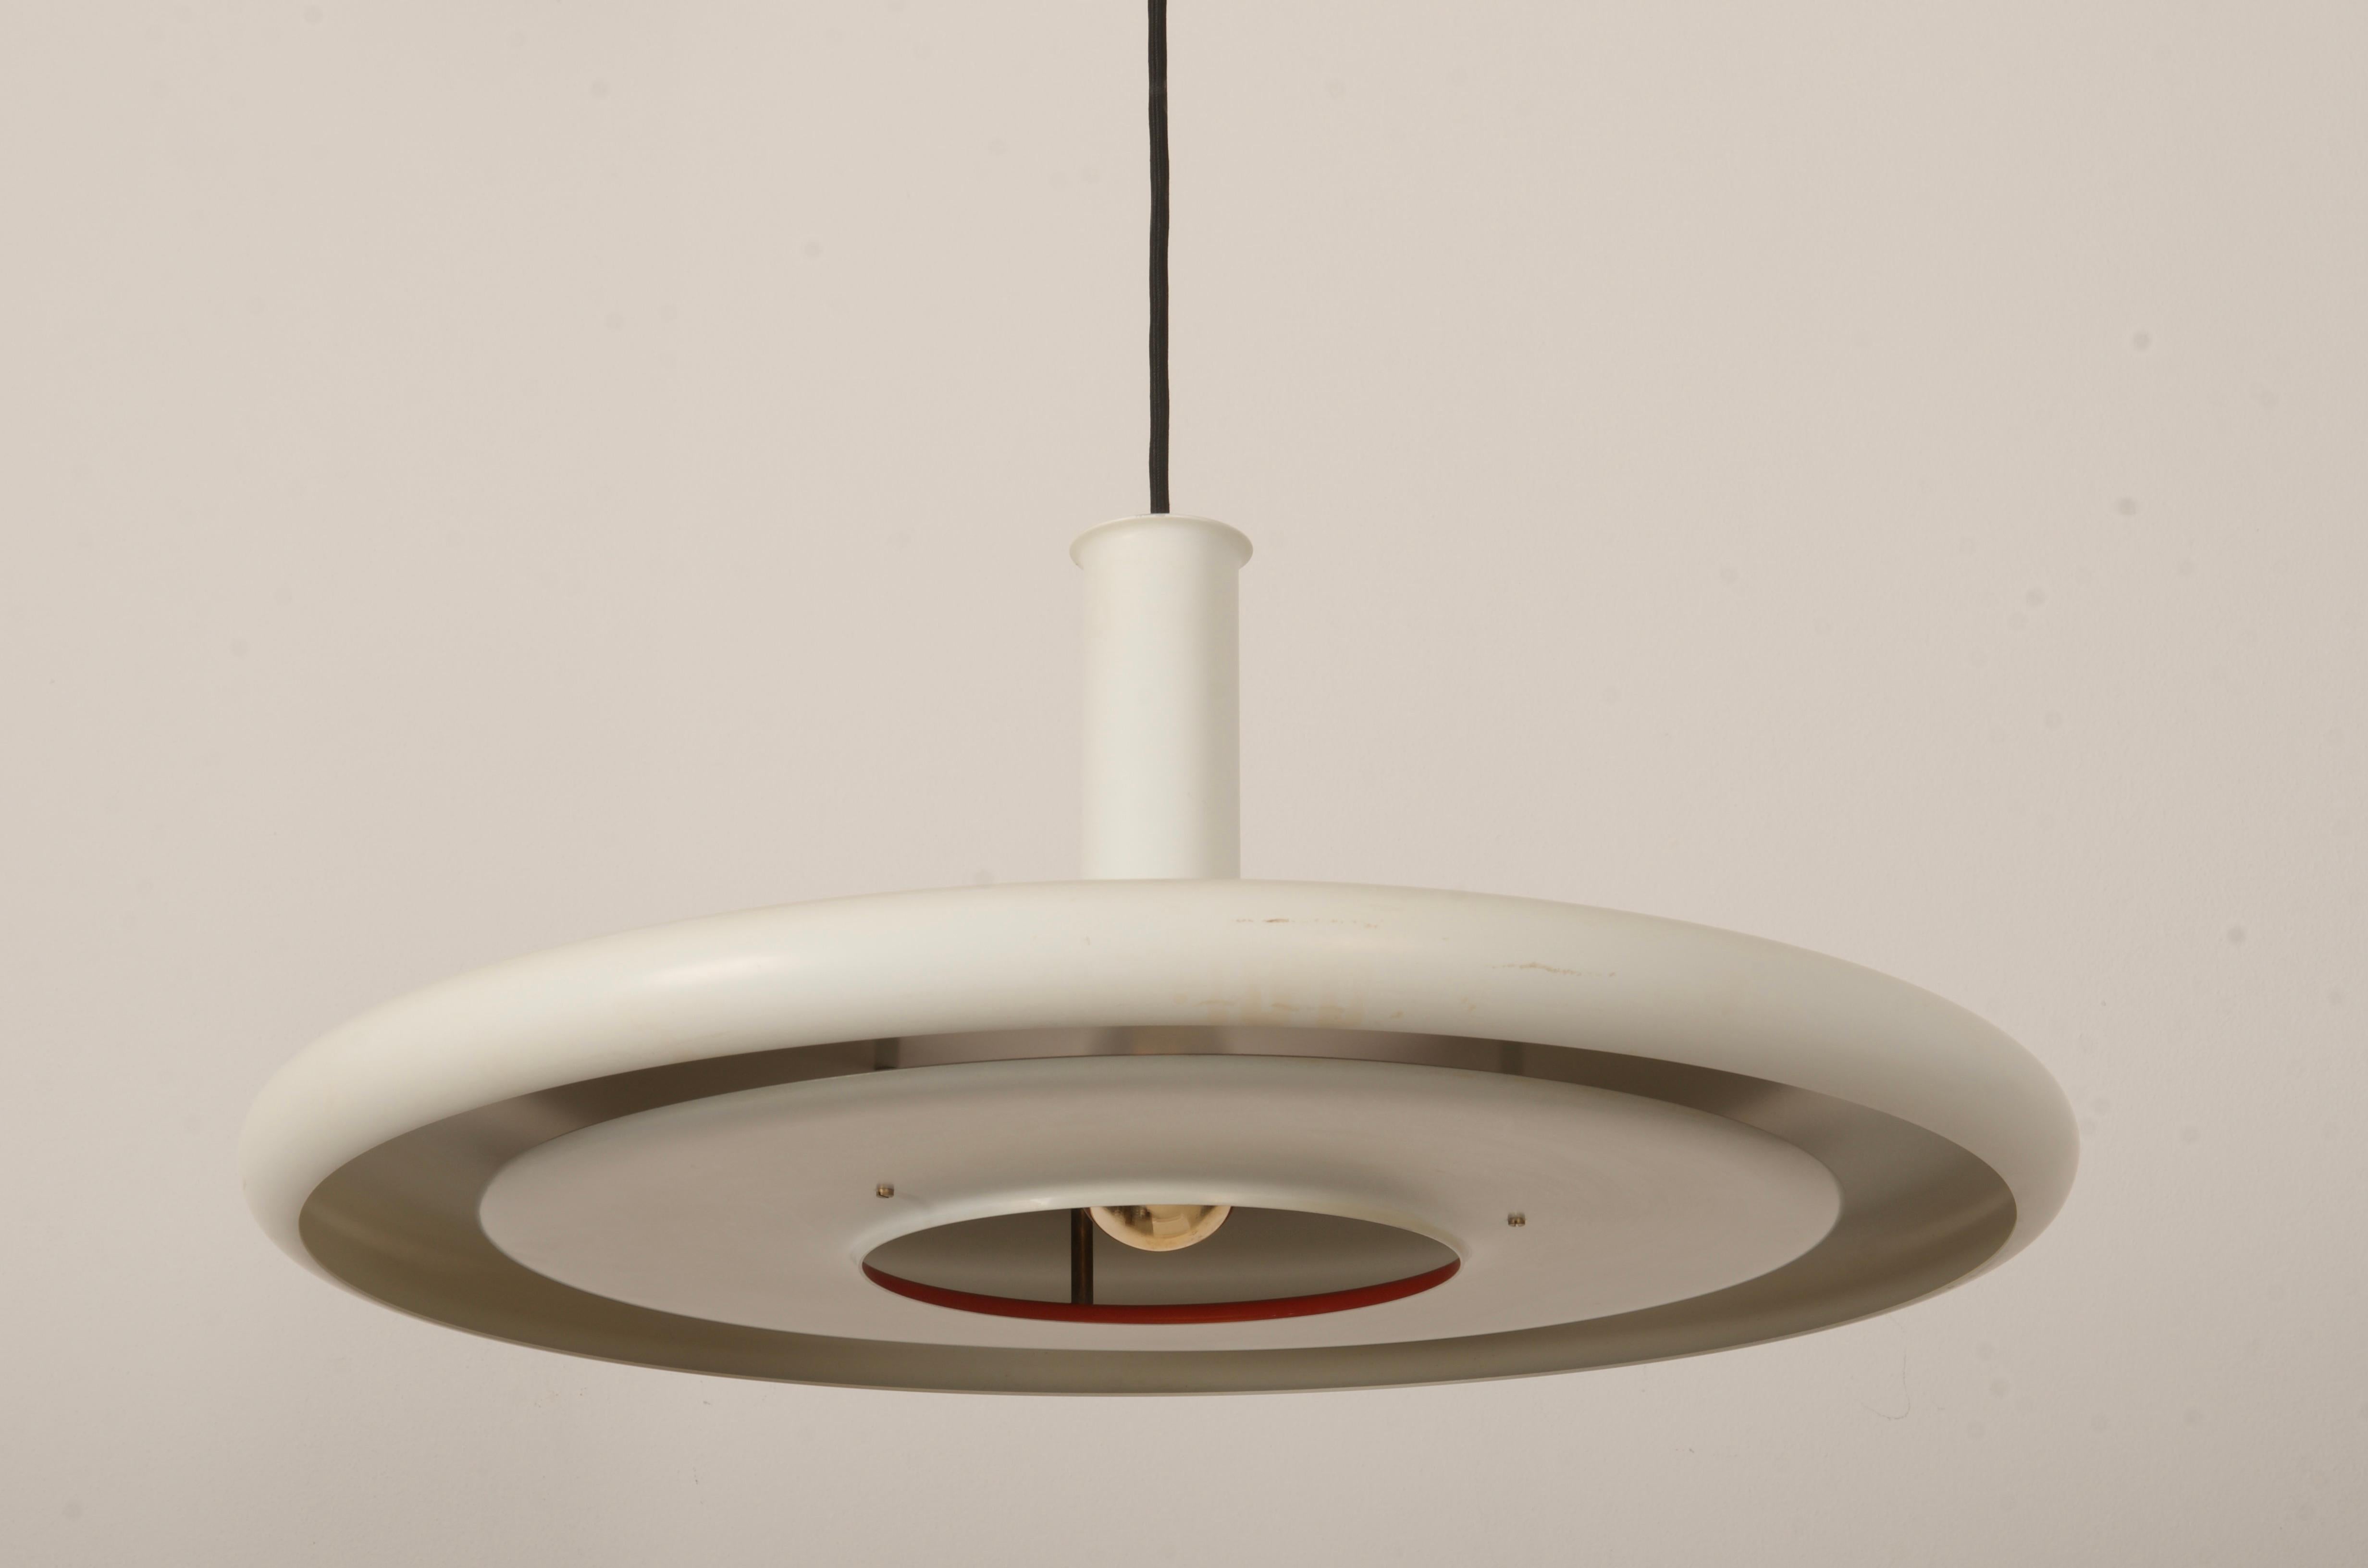 Danish UFO style pendant ceiling light ’Optima’ designed by Hans Due for Fog & Morup. Launched in 1972 the ‘Optima’ series has a definite ‘Space Age’ feel with its sleek futuristic design, looking almost impossibly thin from a side profile. It is in